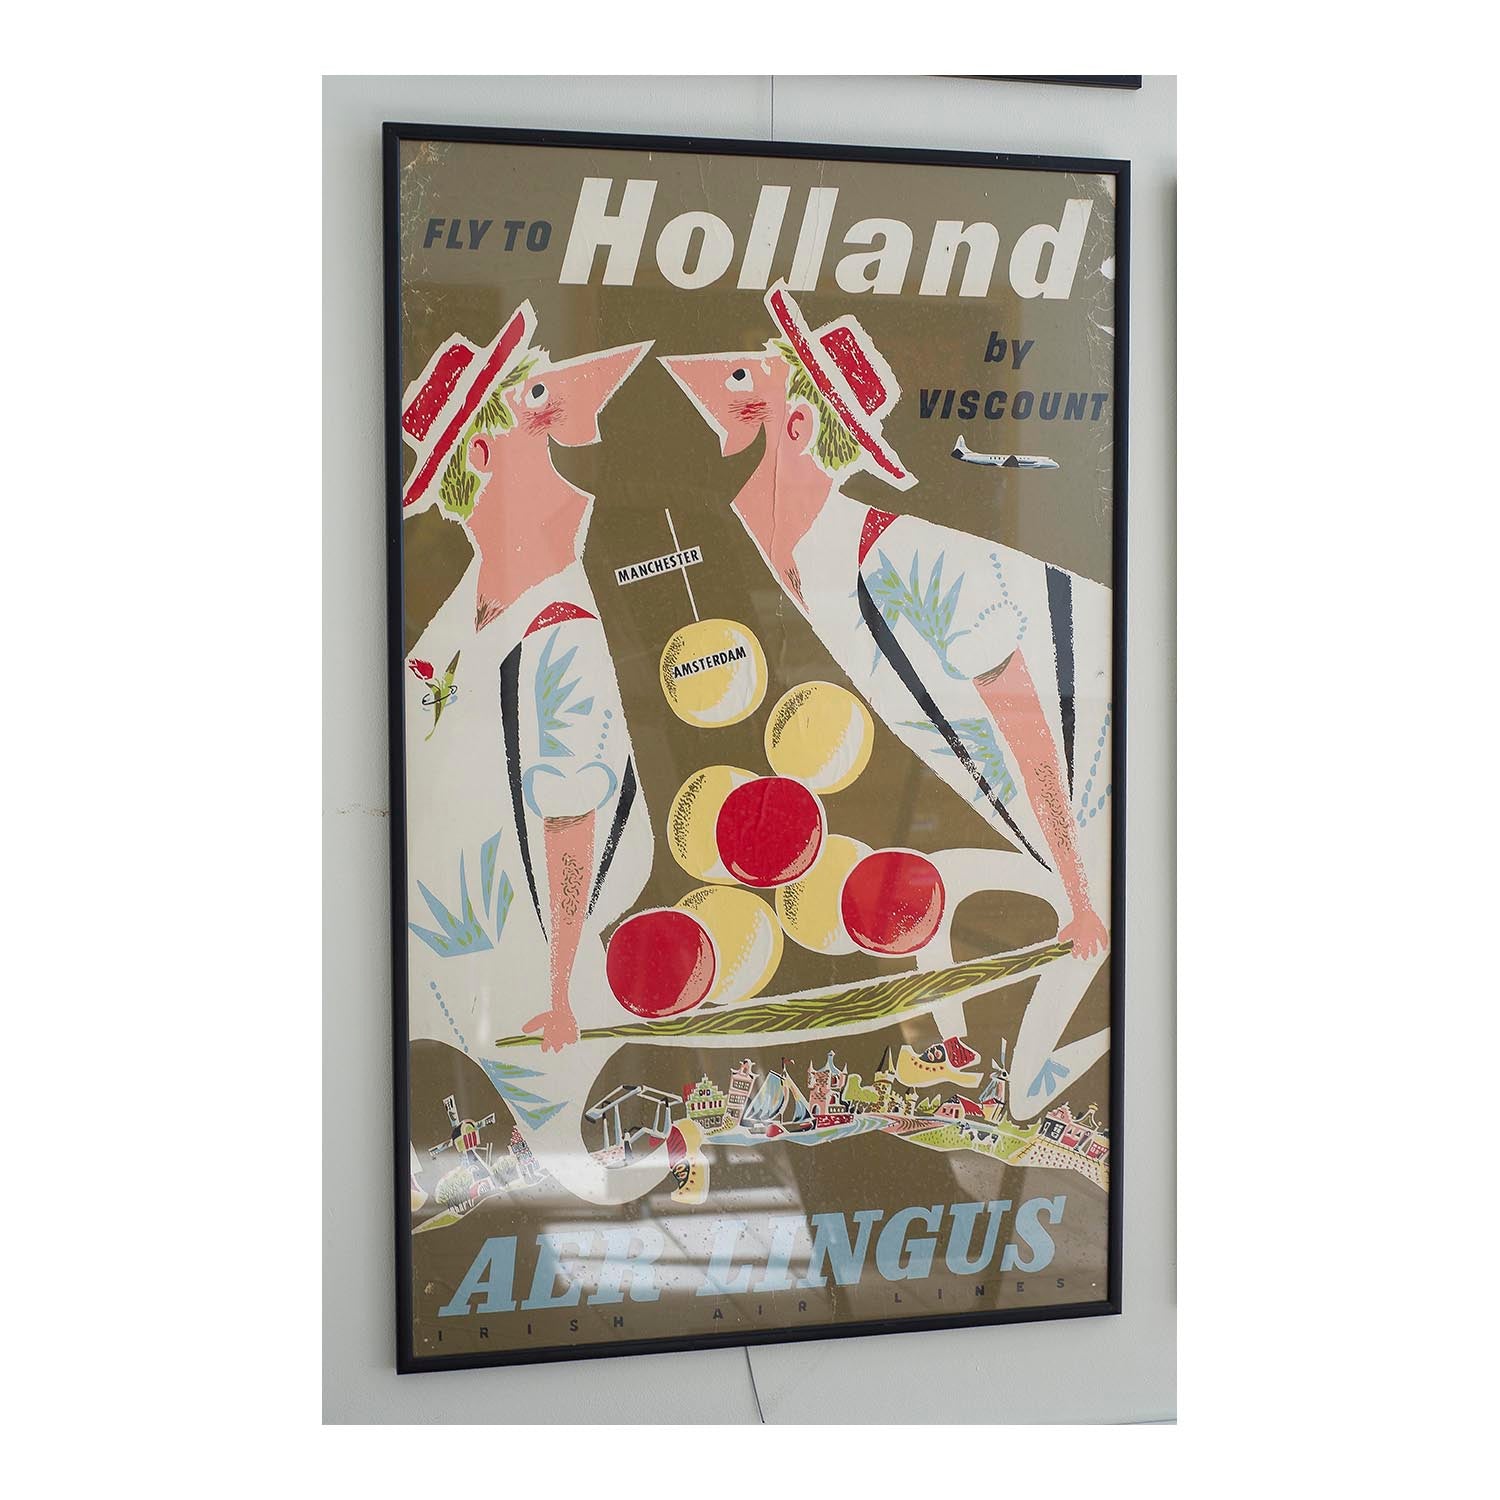 An original travel poster, Holland by Viscount, published by Aer Lingus, c. 1957-58. The poster publicises flights from Manchester to Amsterdam with a depiction of which is included flying over two Dutchmen, precariously delivery a batch of circular Edam cheeses.